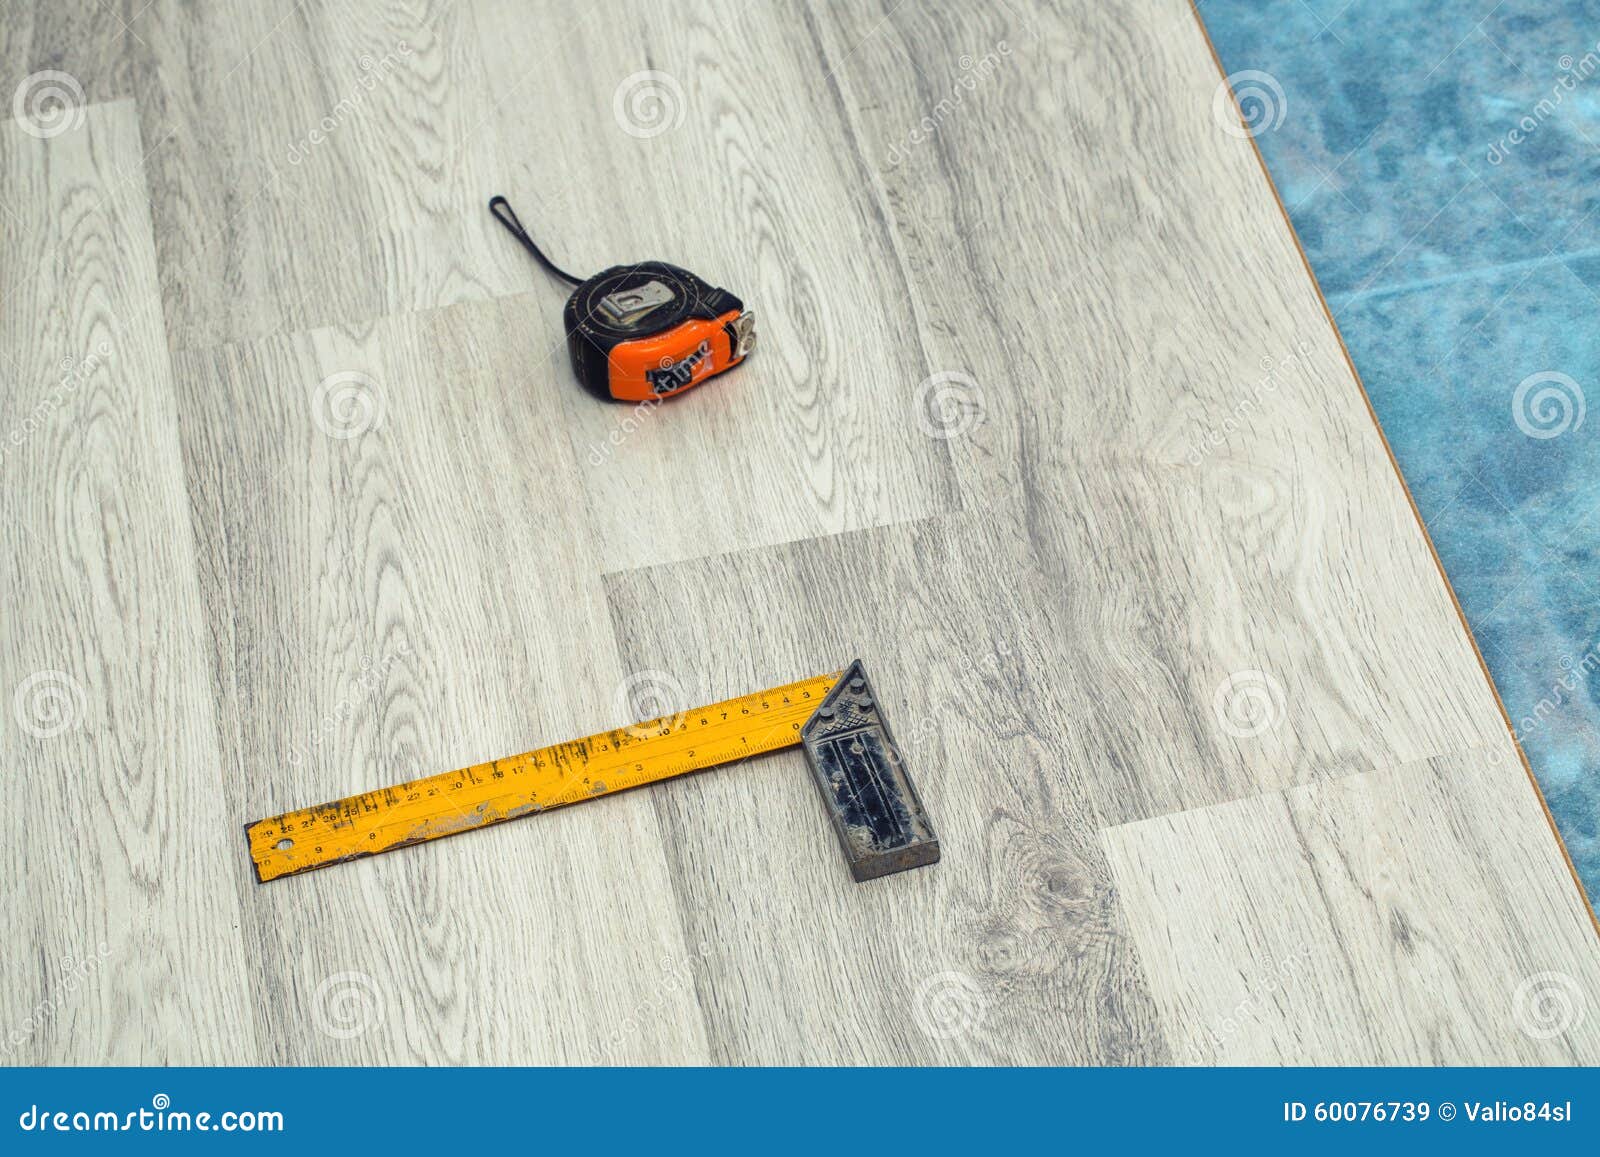 Wood Flooring Installation And Tools Stock Image Image Of